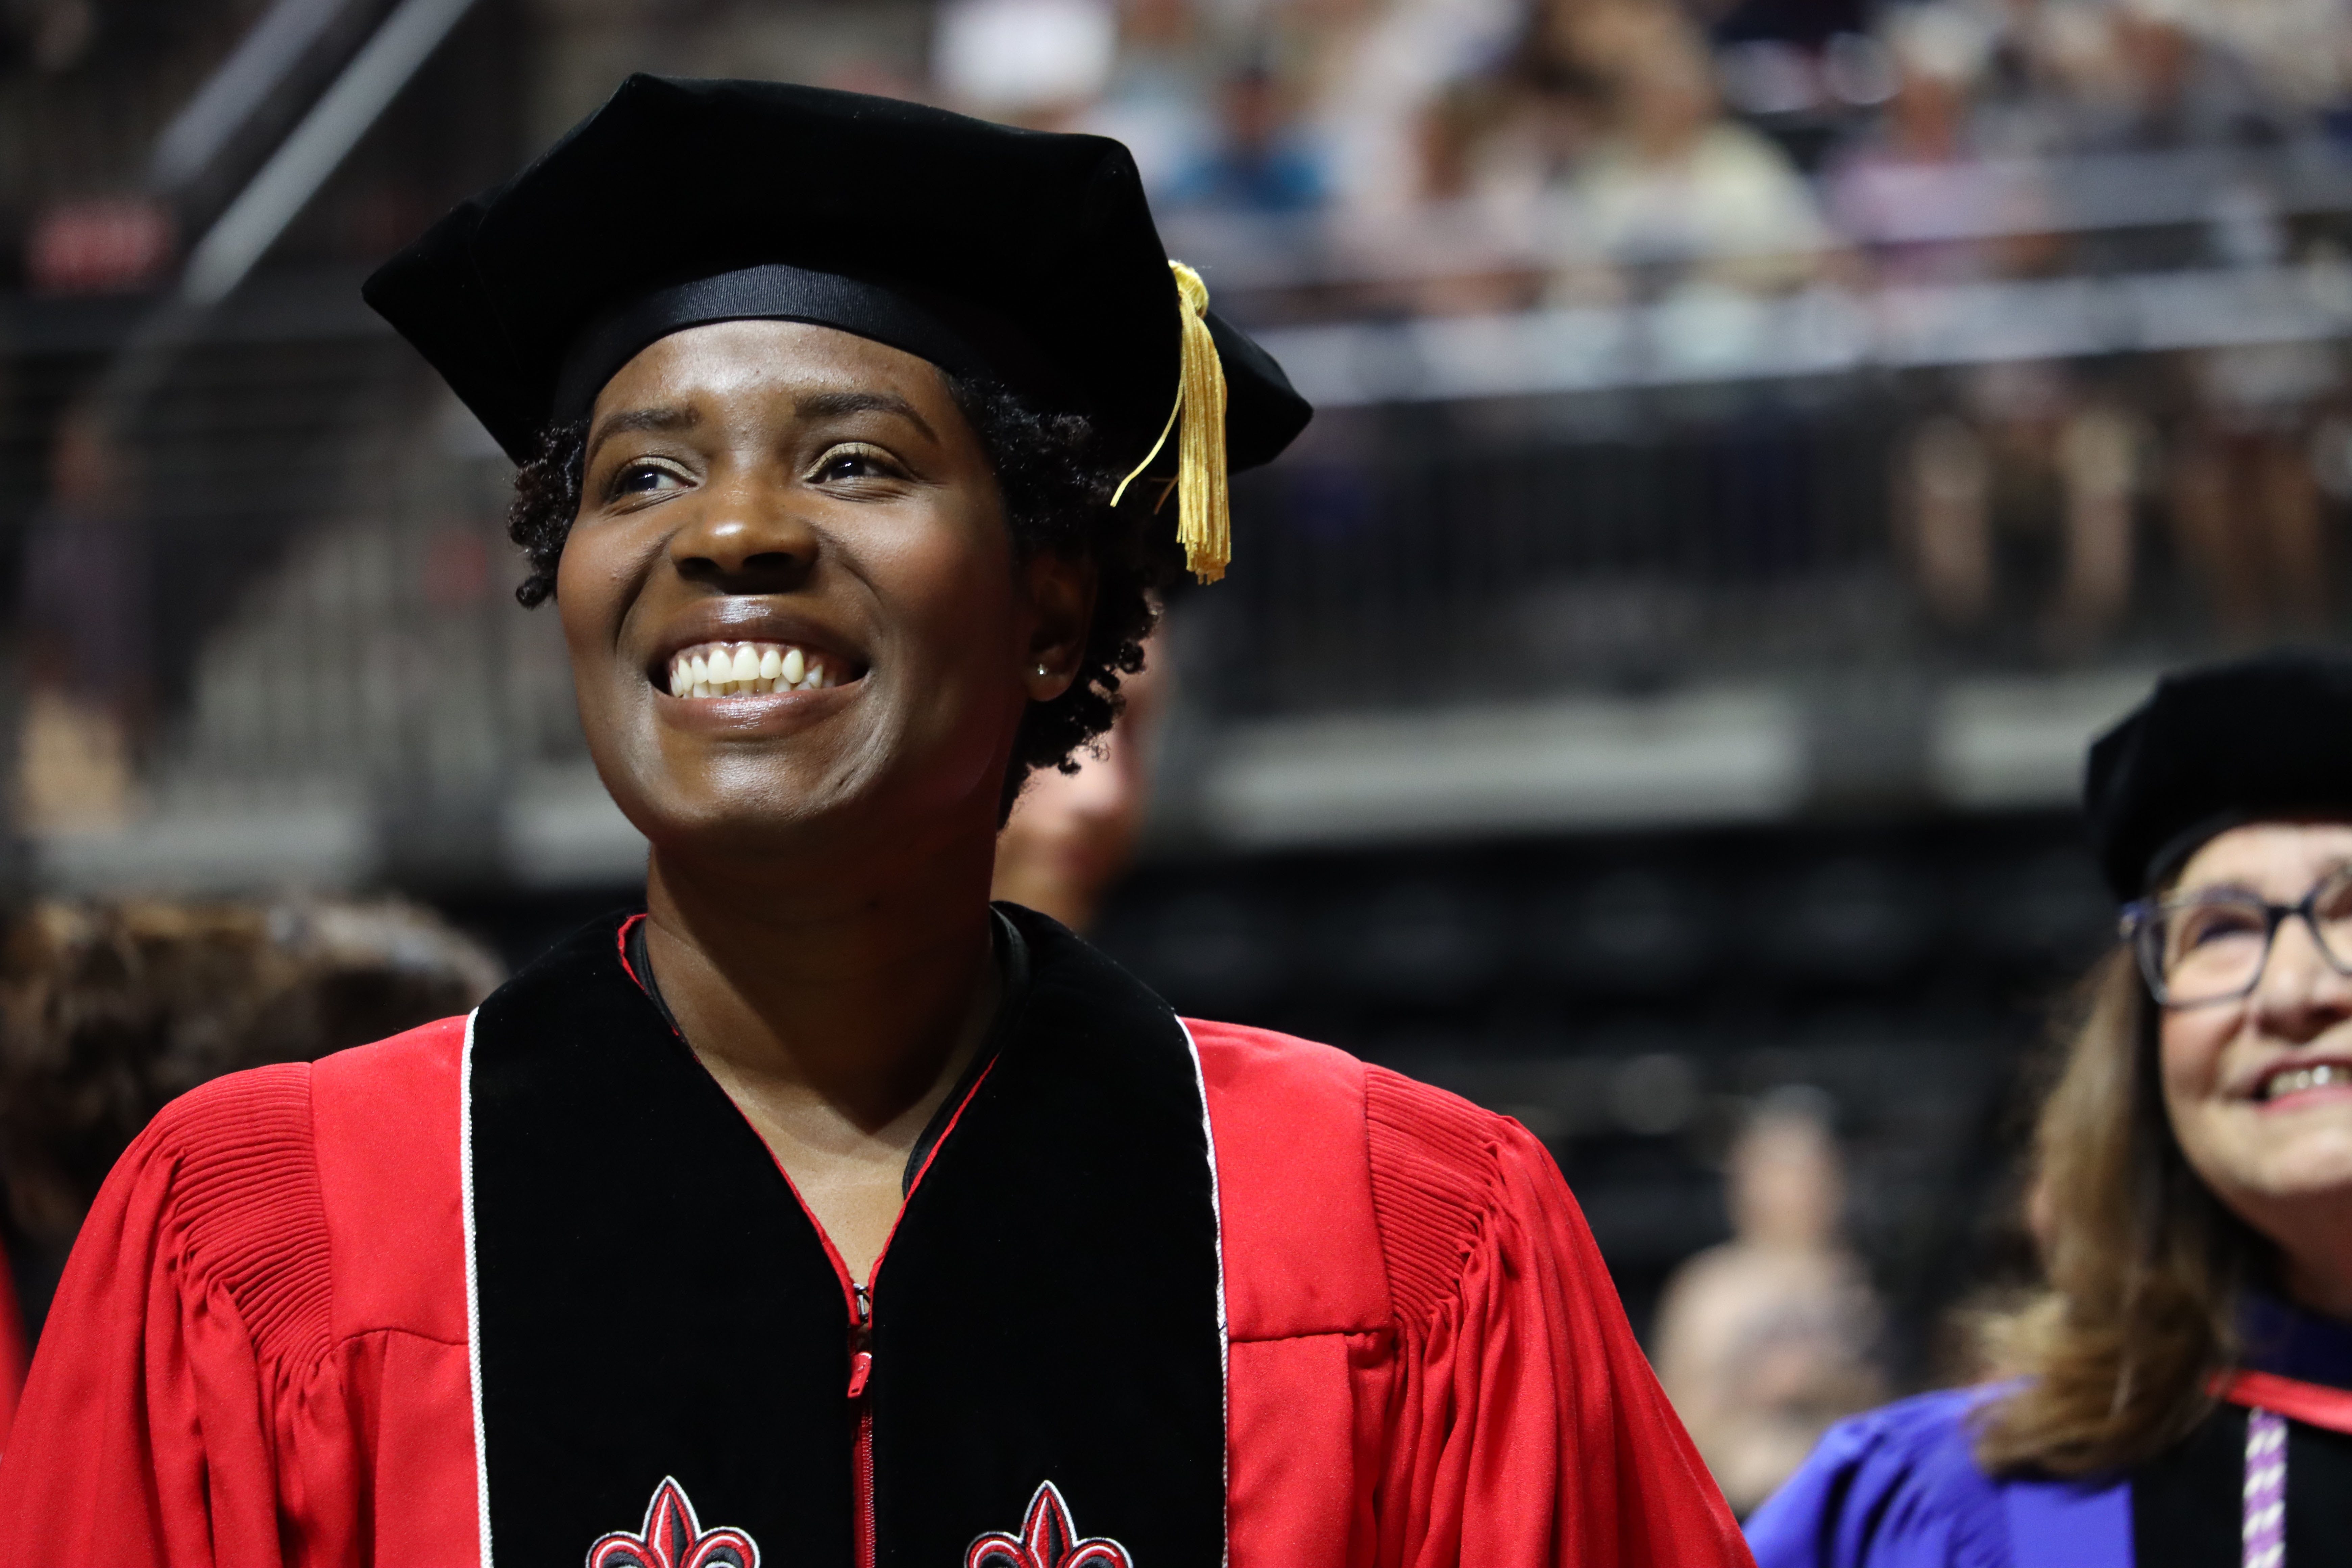 Mecca Daigre, DNP, smiles during UL Lafayette commencement ceremonies in the black and red doctoral regalia.